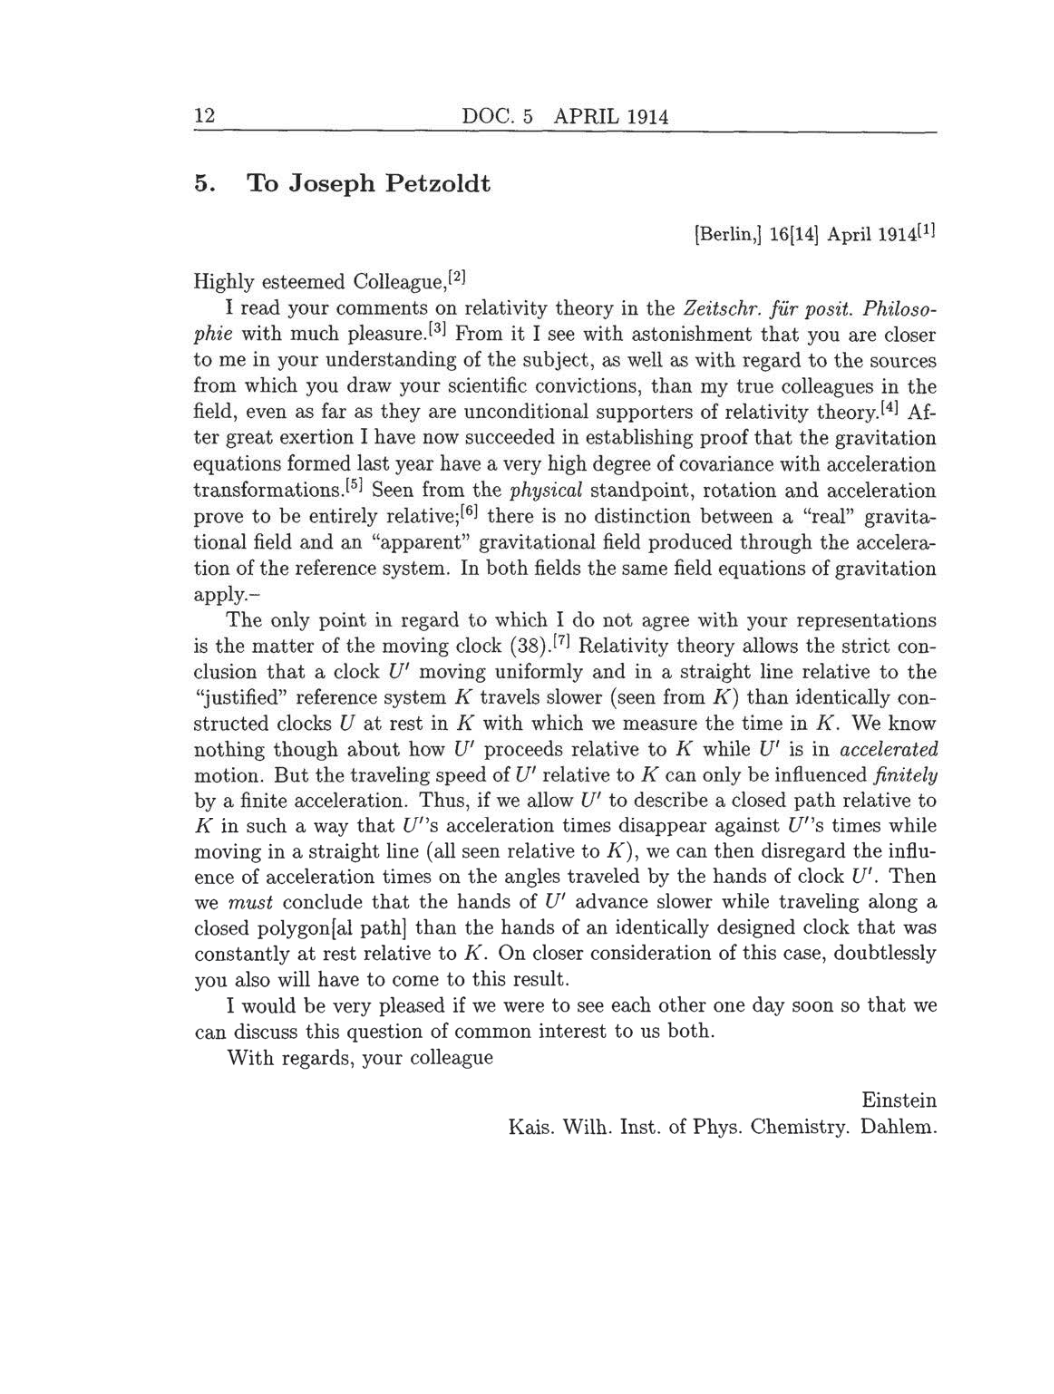 Volume 8: The Berlin Years: Correspondence, 1914-1918 (English translation supplement) page 12